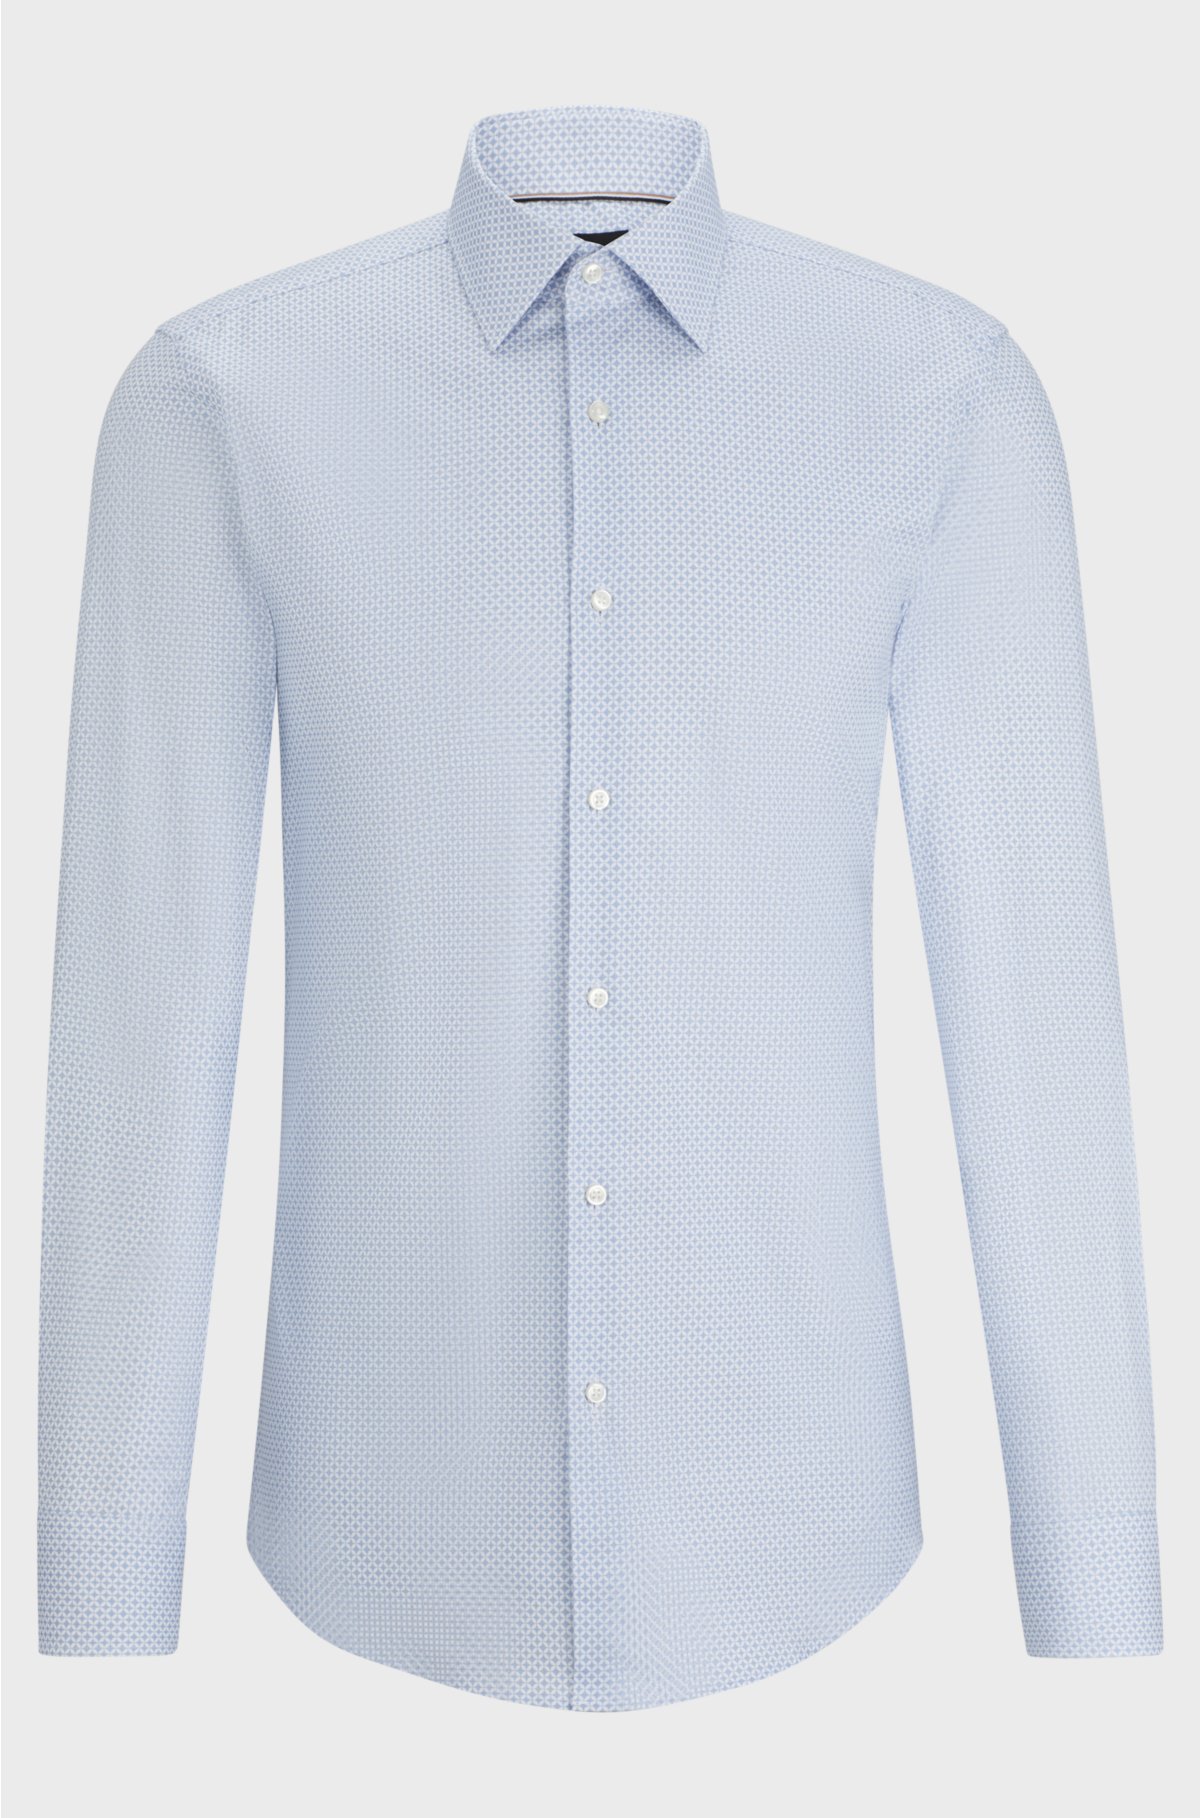 Slim-fit shirt in printed stretch-cotton dobby, Light Blue